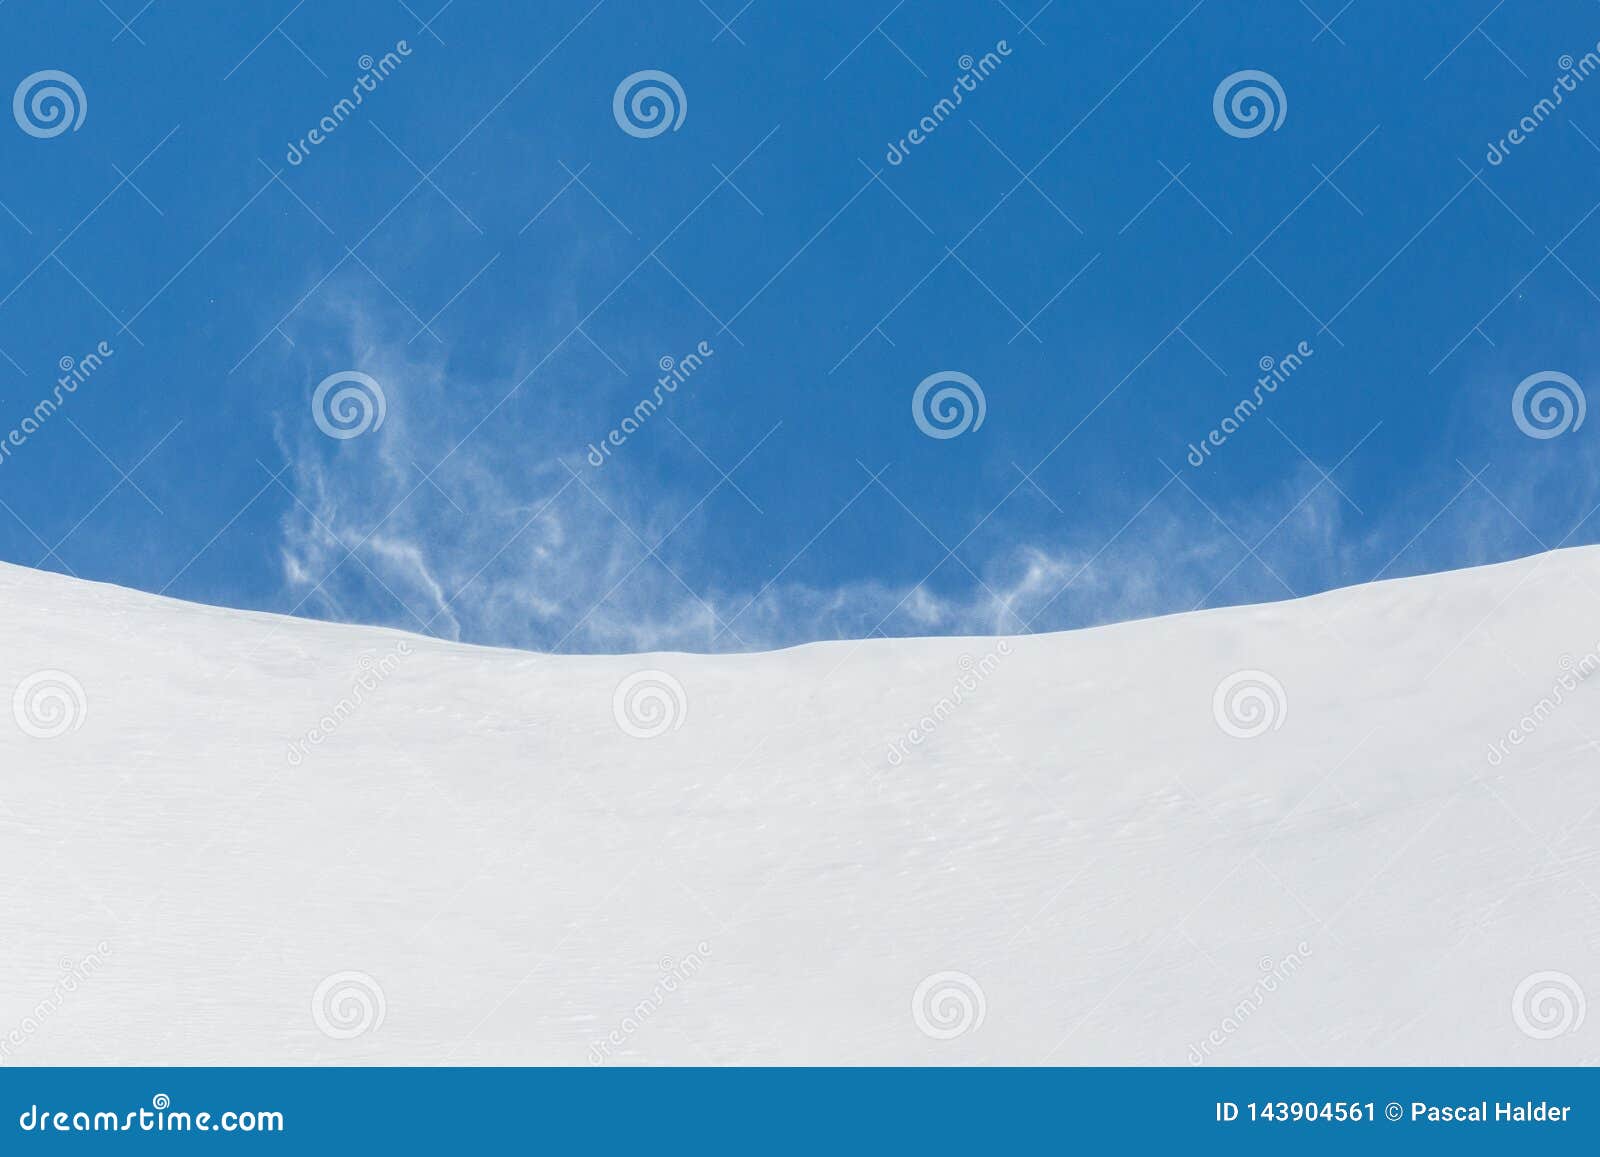 strong squall swirling snow in mountains, blue sky